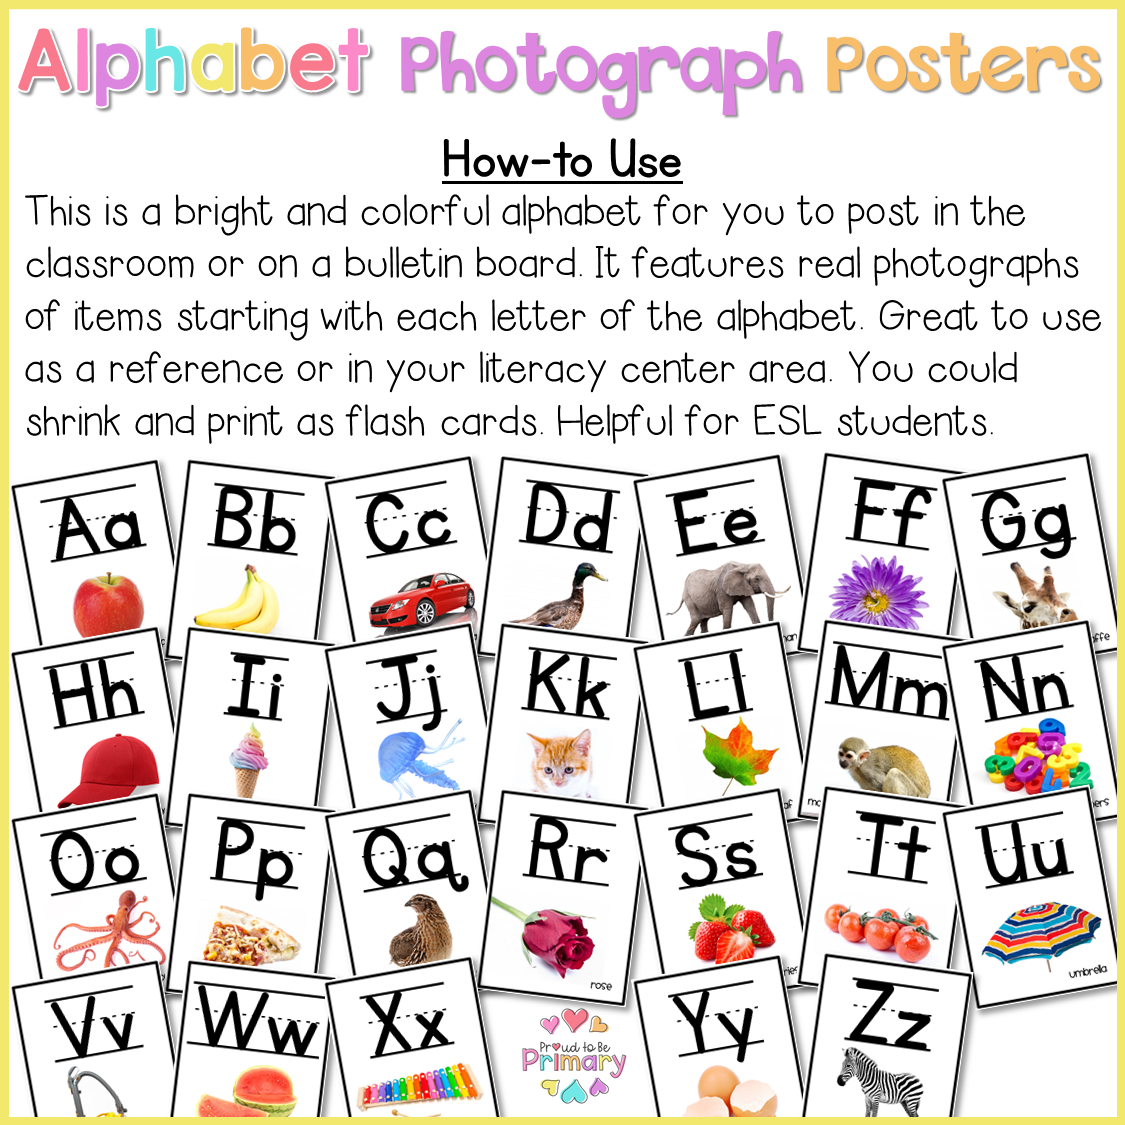 Alphabet Photograph Posters - Proud to be Primary